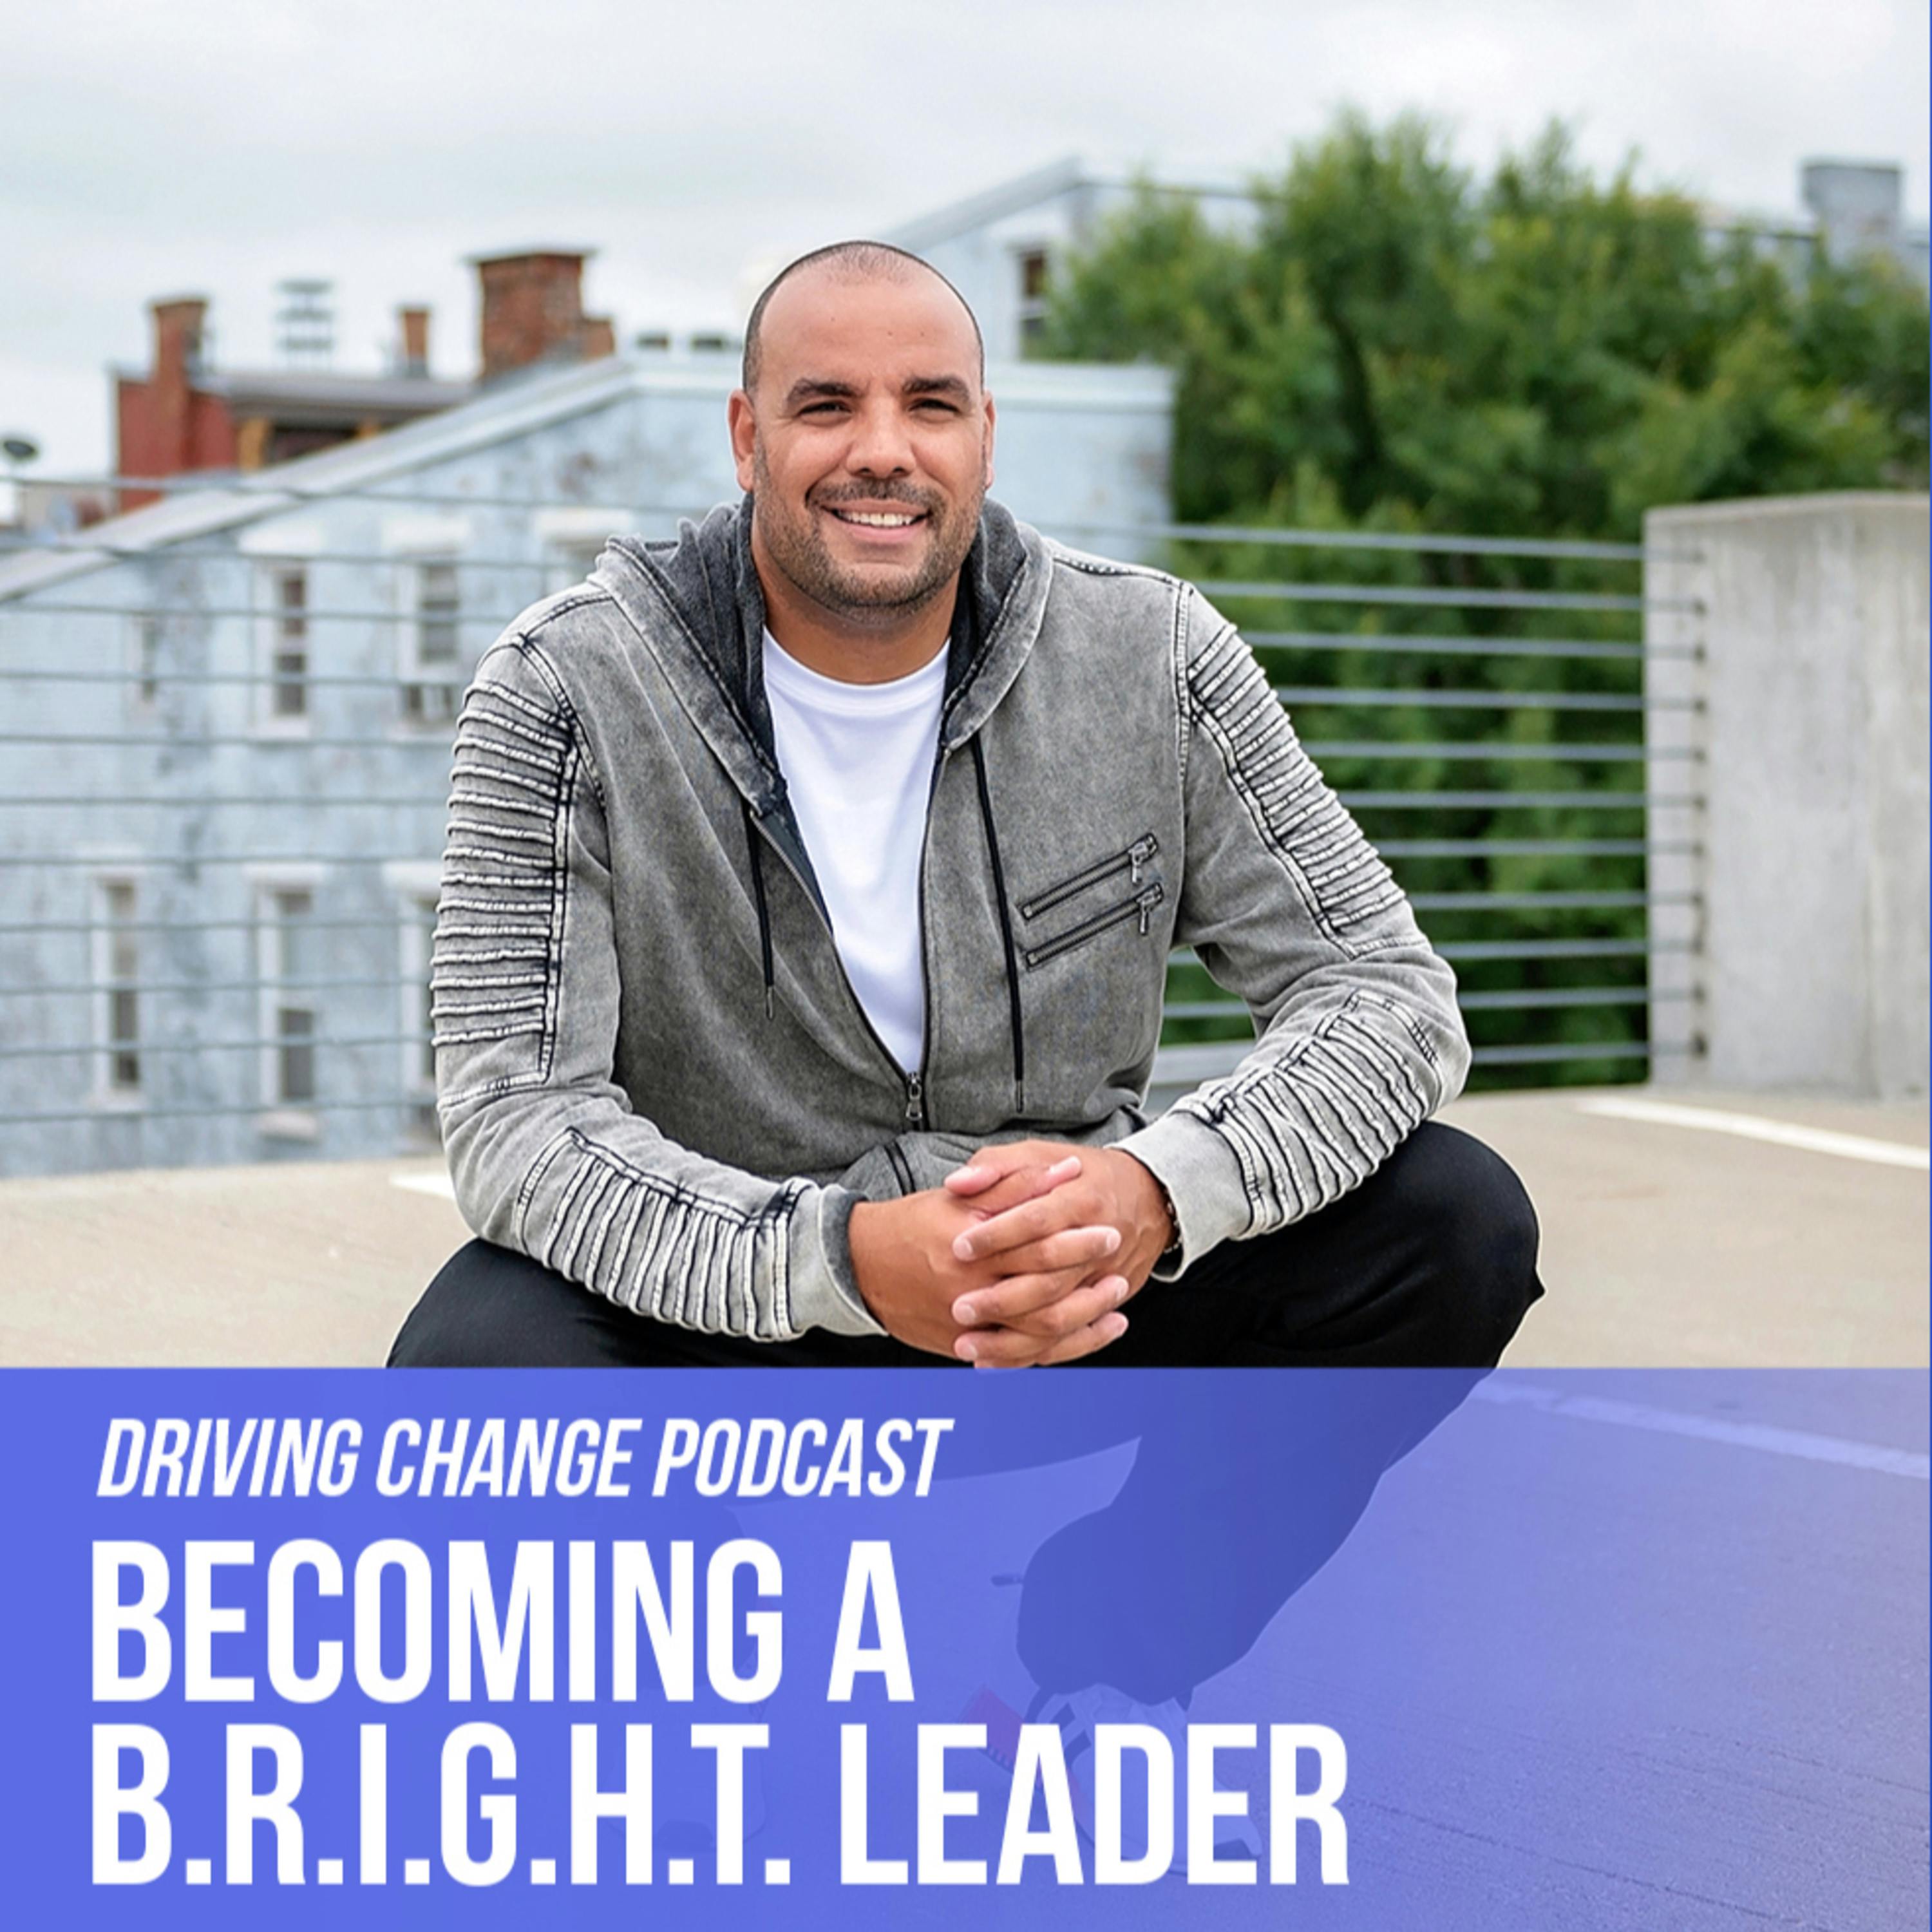 Tommy Seay: Becoming A B.R.I.G.H.T. Leader